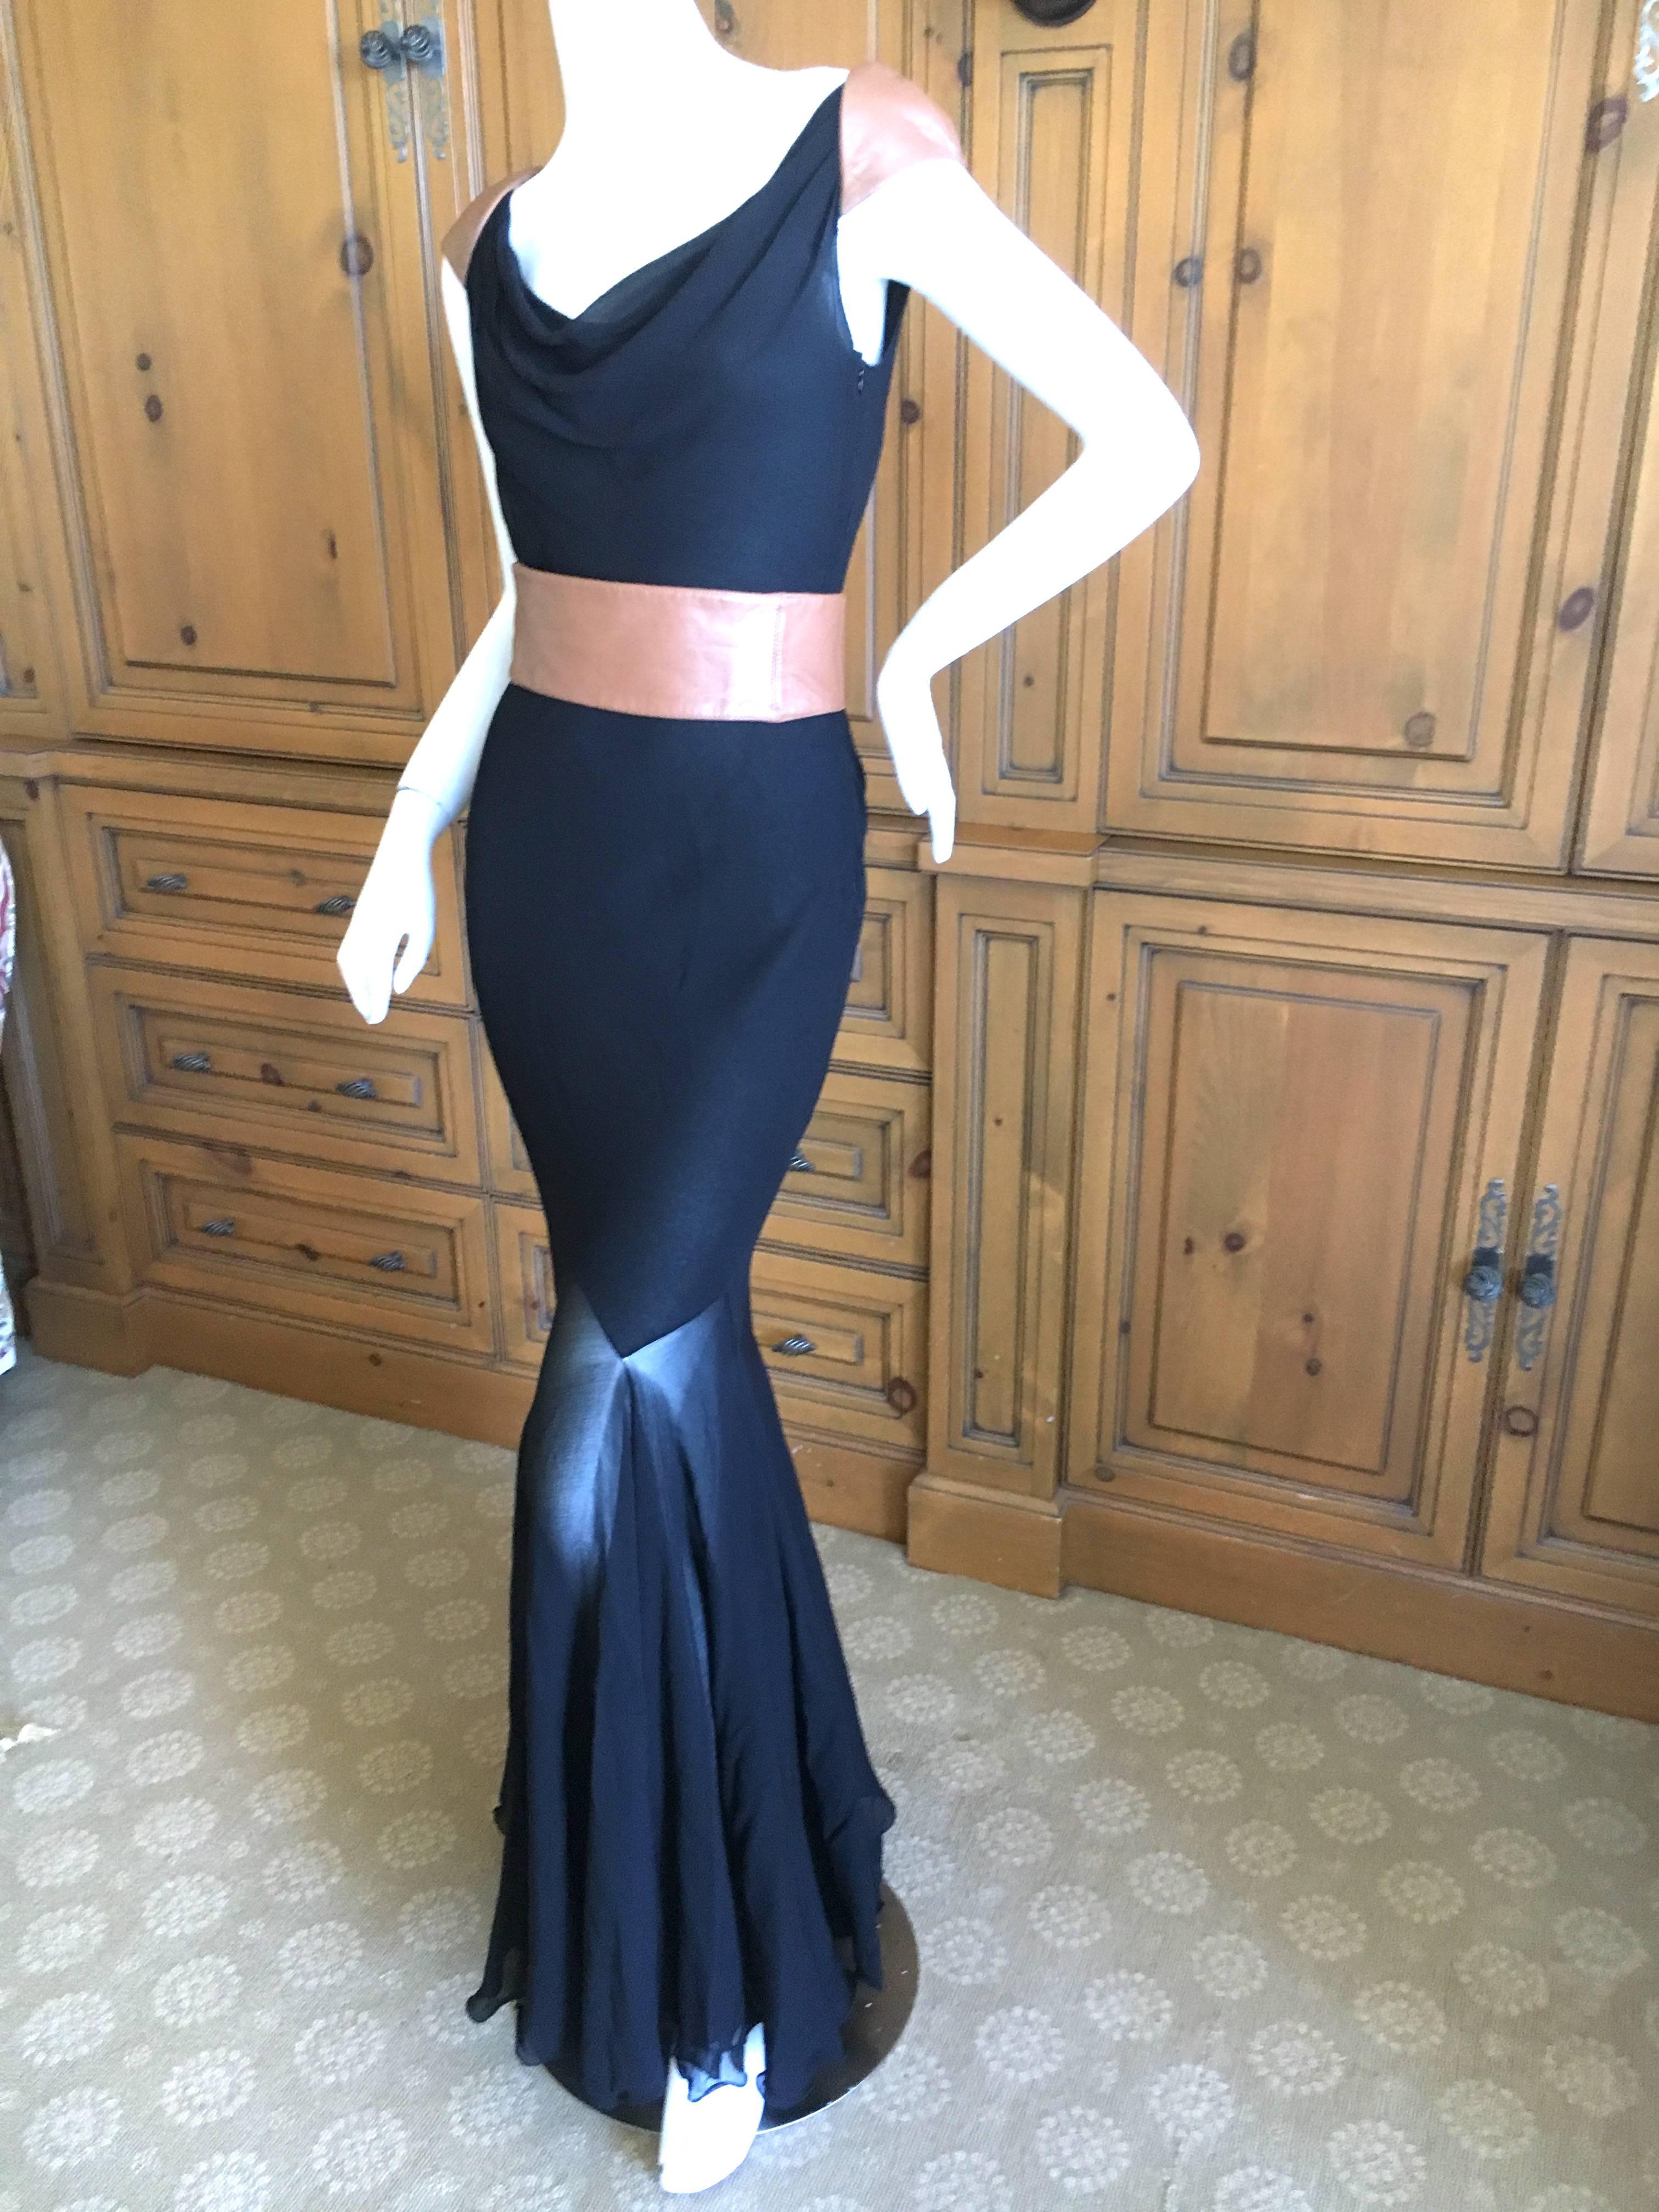 Gianni Versace Couture 1980's Backless Leather Trim Mermaid Gown with Wide Belt. 
Wear with or without the belt.
Very sexy back.
This is so much prettier than the photos show. 
The mermaid part of the skirt is sheer.
Size 38
 Bust 39